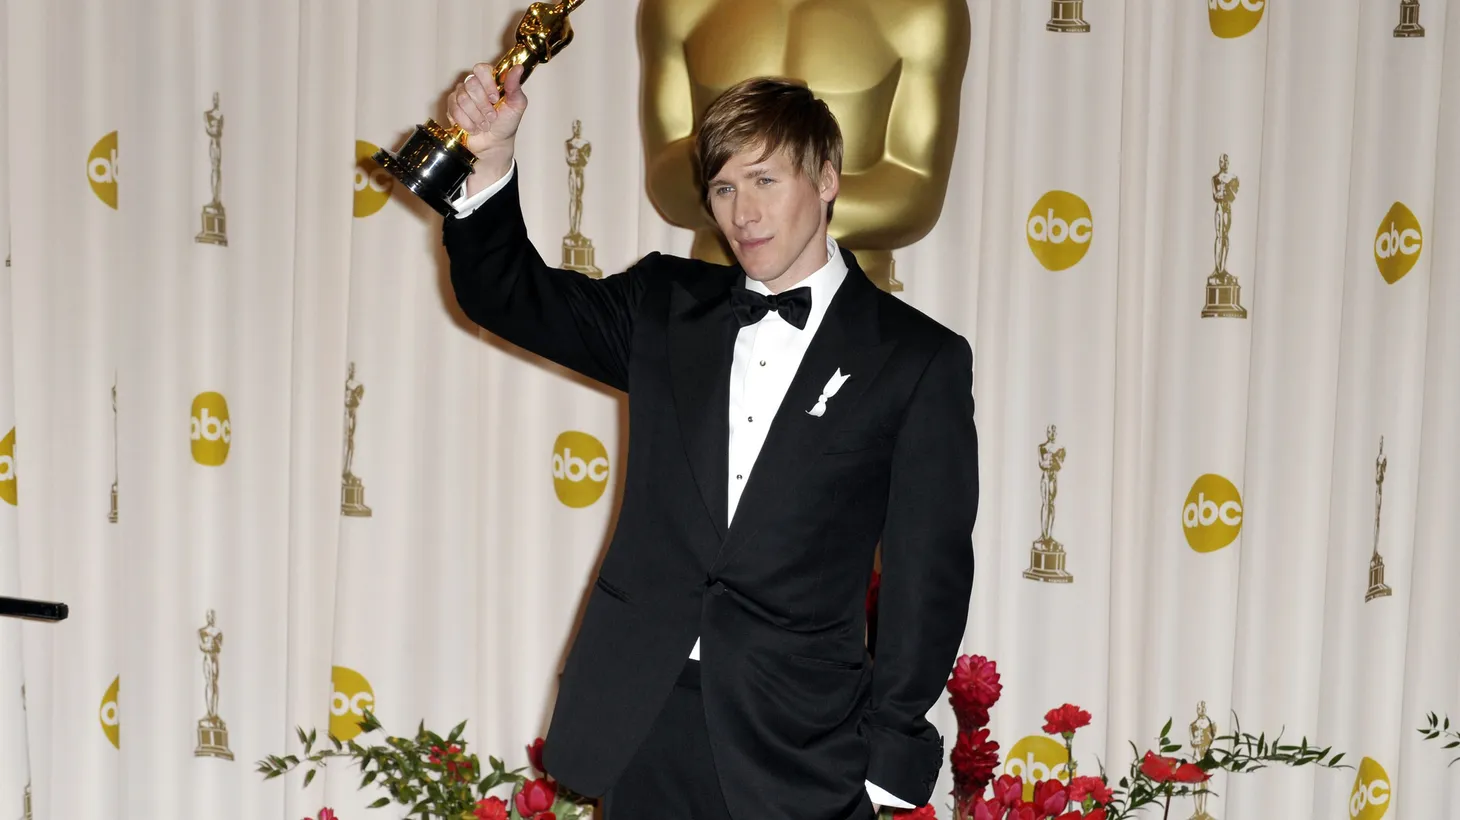 Oscar-winning screenwriter Dustin Lance Black is the subject of a new HBO documentary that examines his work to find common ground with the Mormon church on gay rights and working to overturn Prop 8.